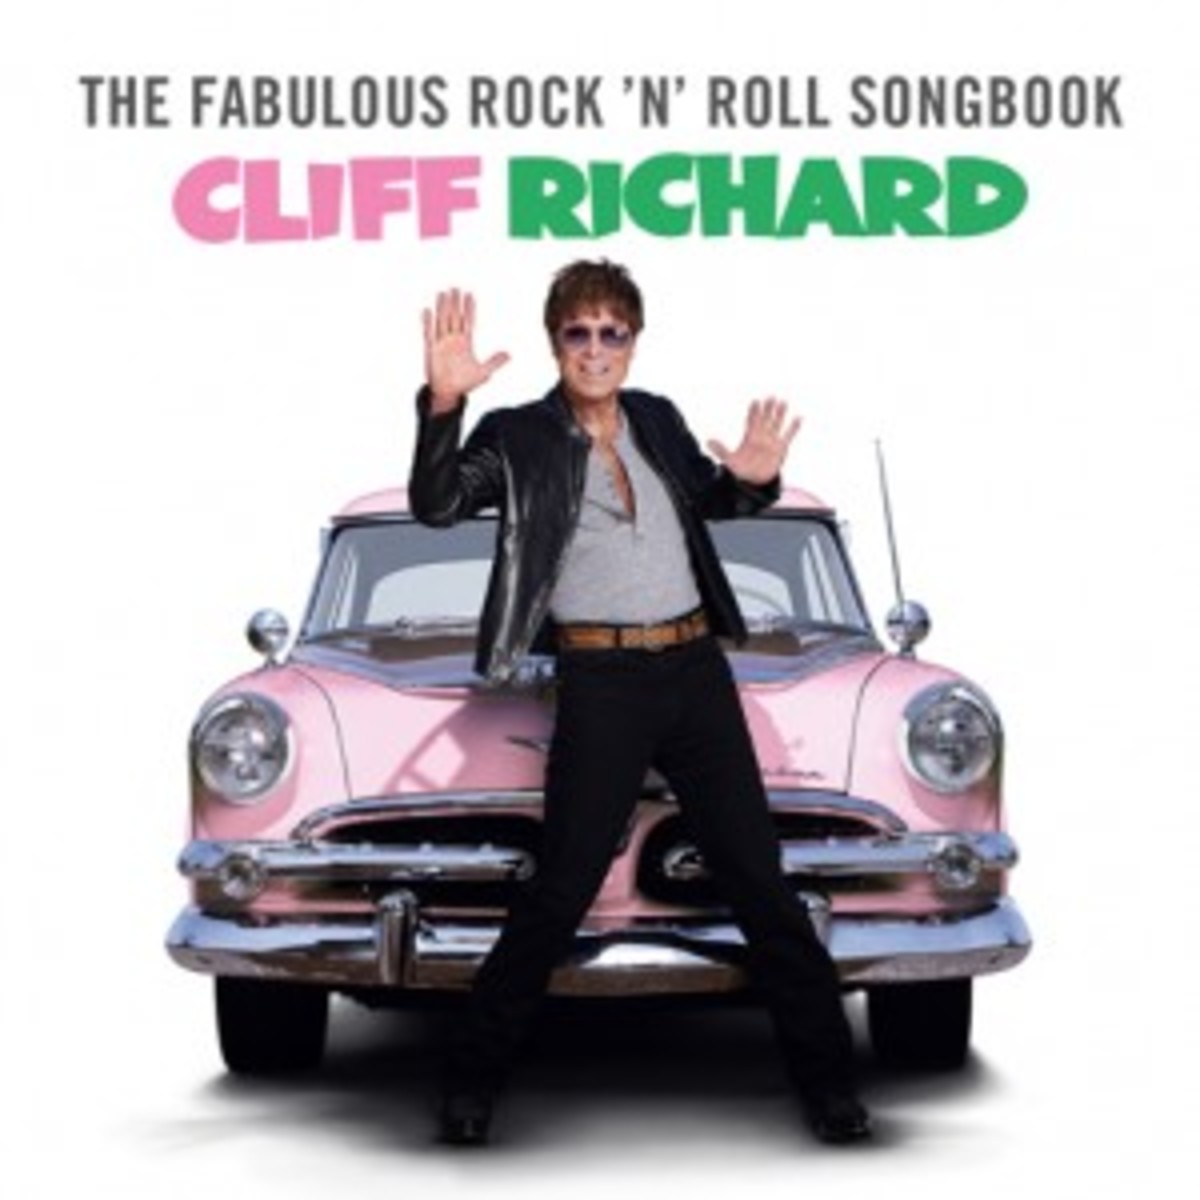 Cliff Richard The Fabulous Rock 'n' Roll Songbook